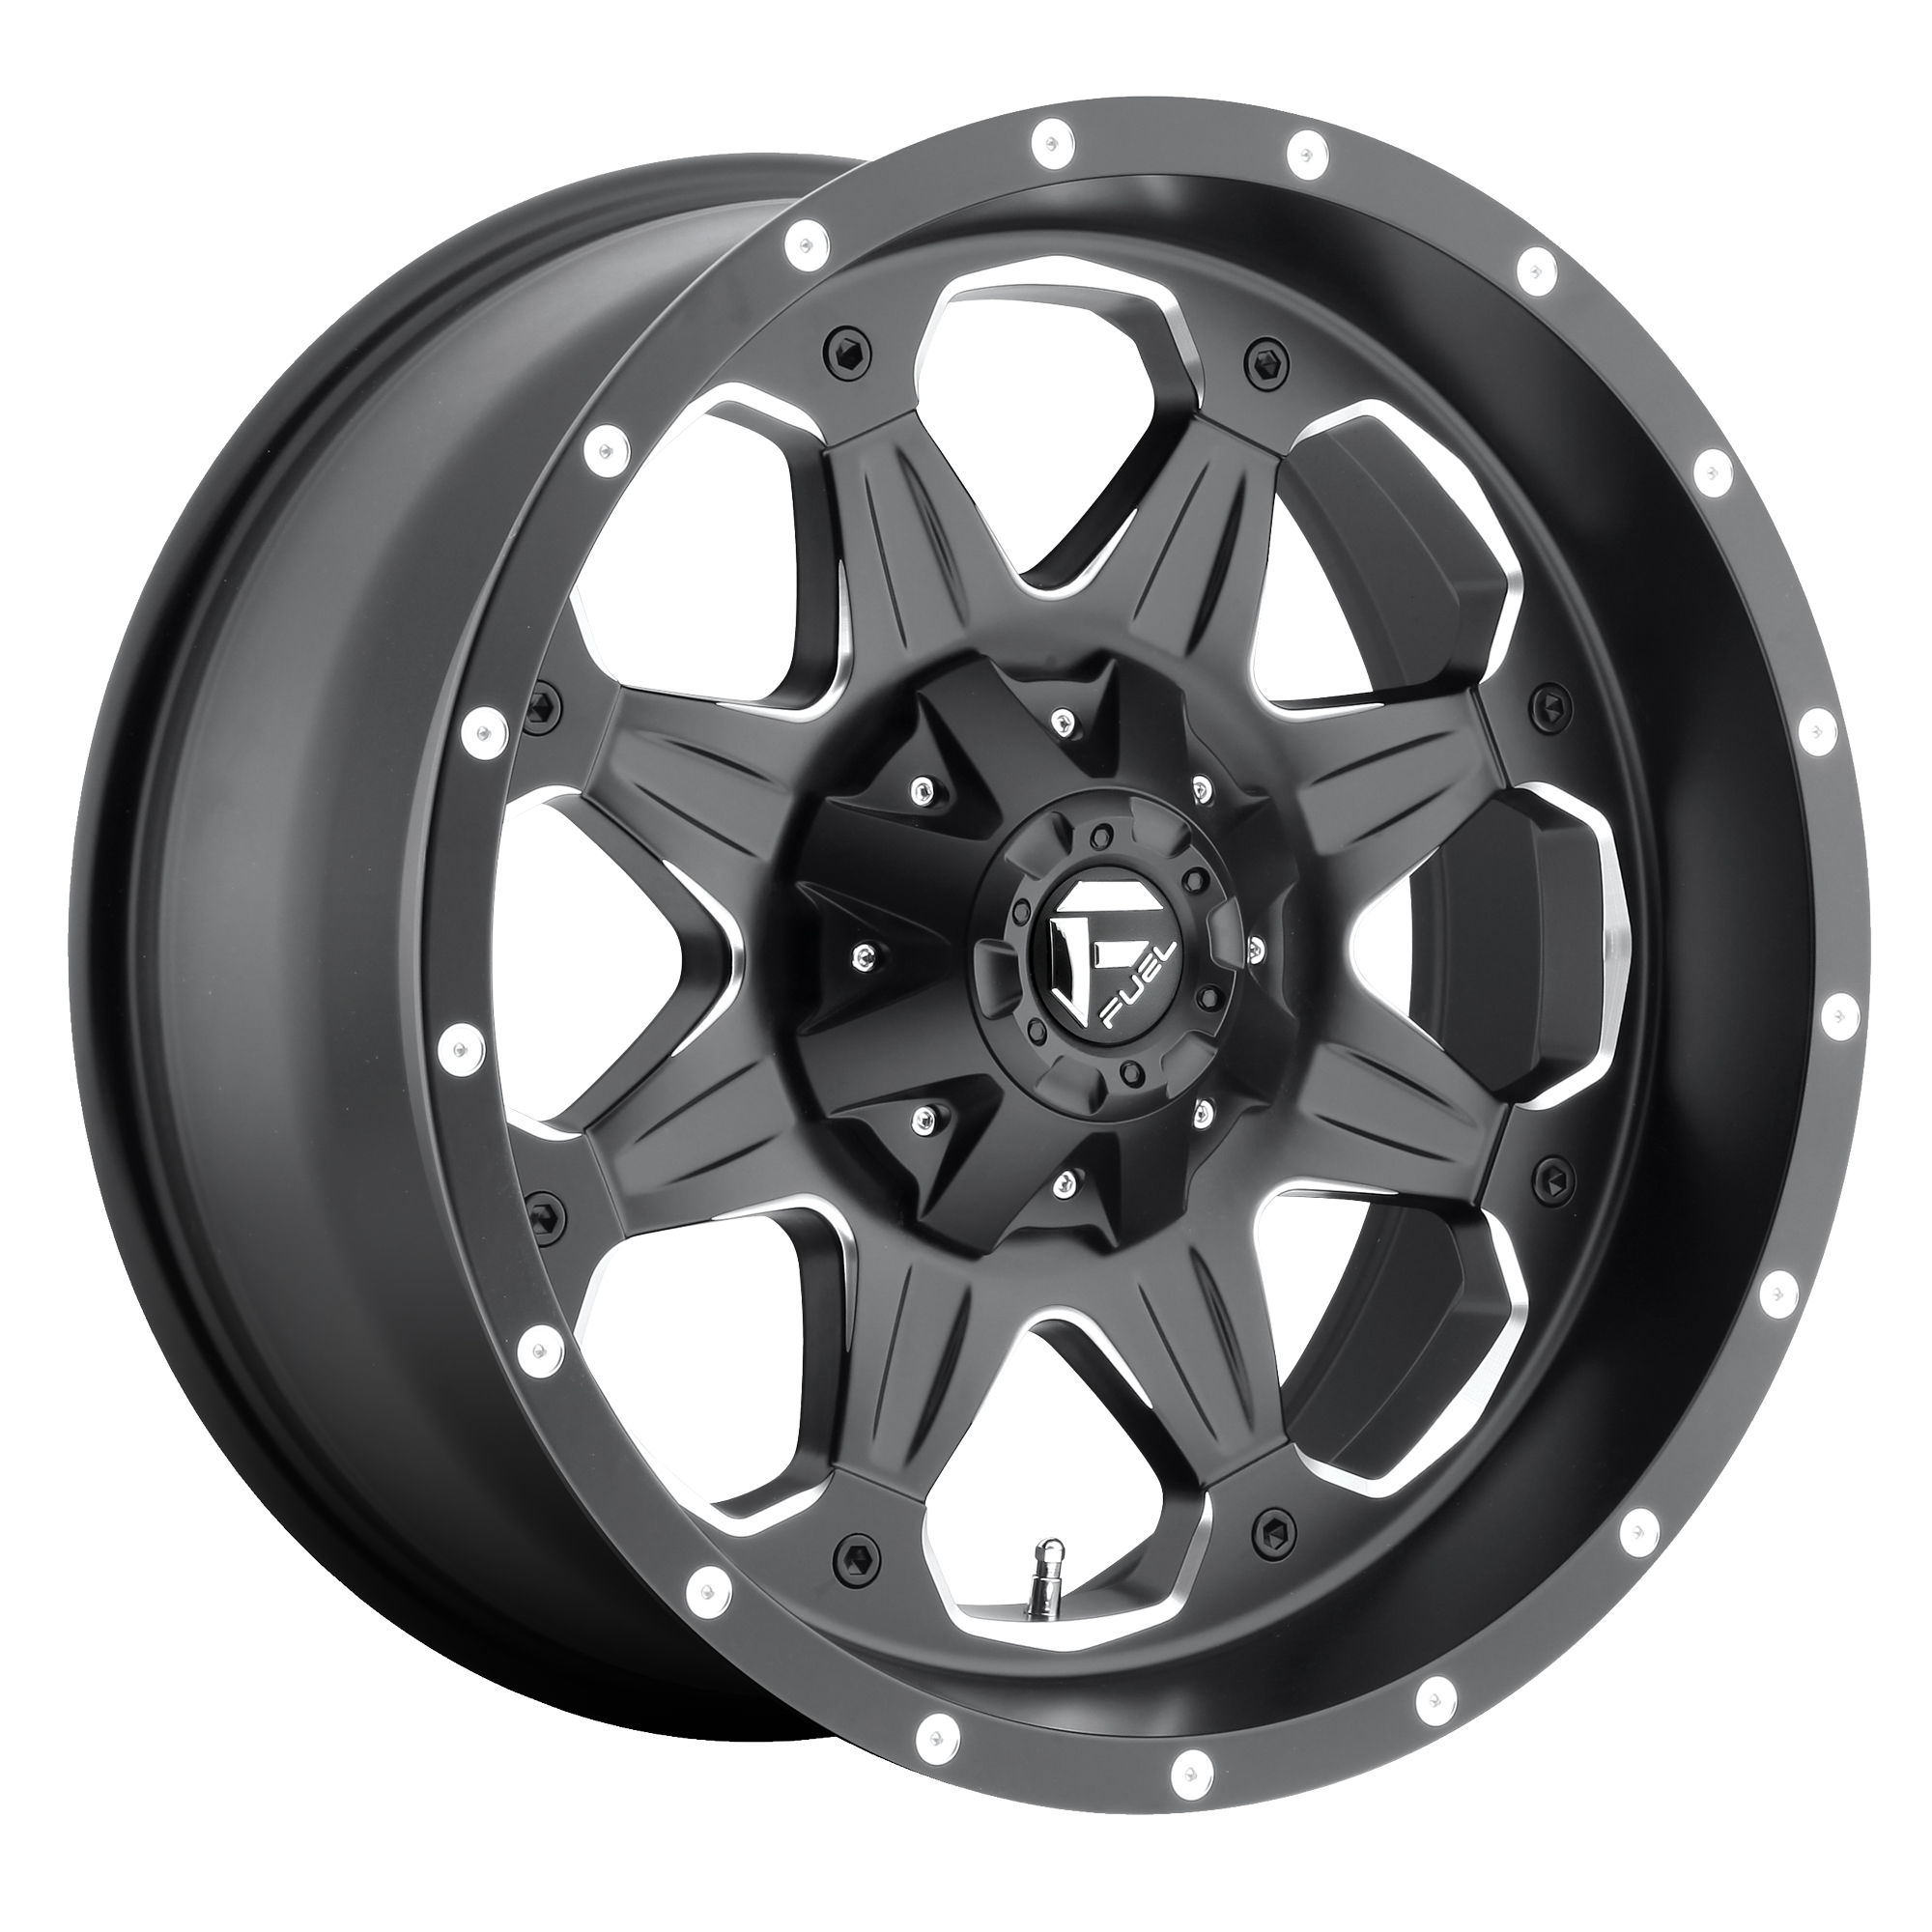 BOOST 18x9 5x114.30/5x127.00 MATTE BLACK MILLED (1 mm) - Tires and Engine Performance